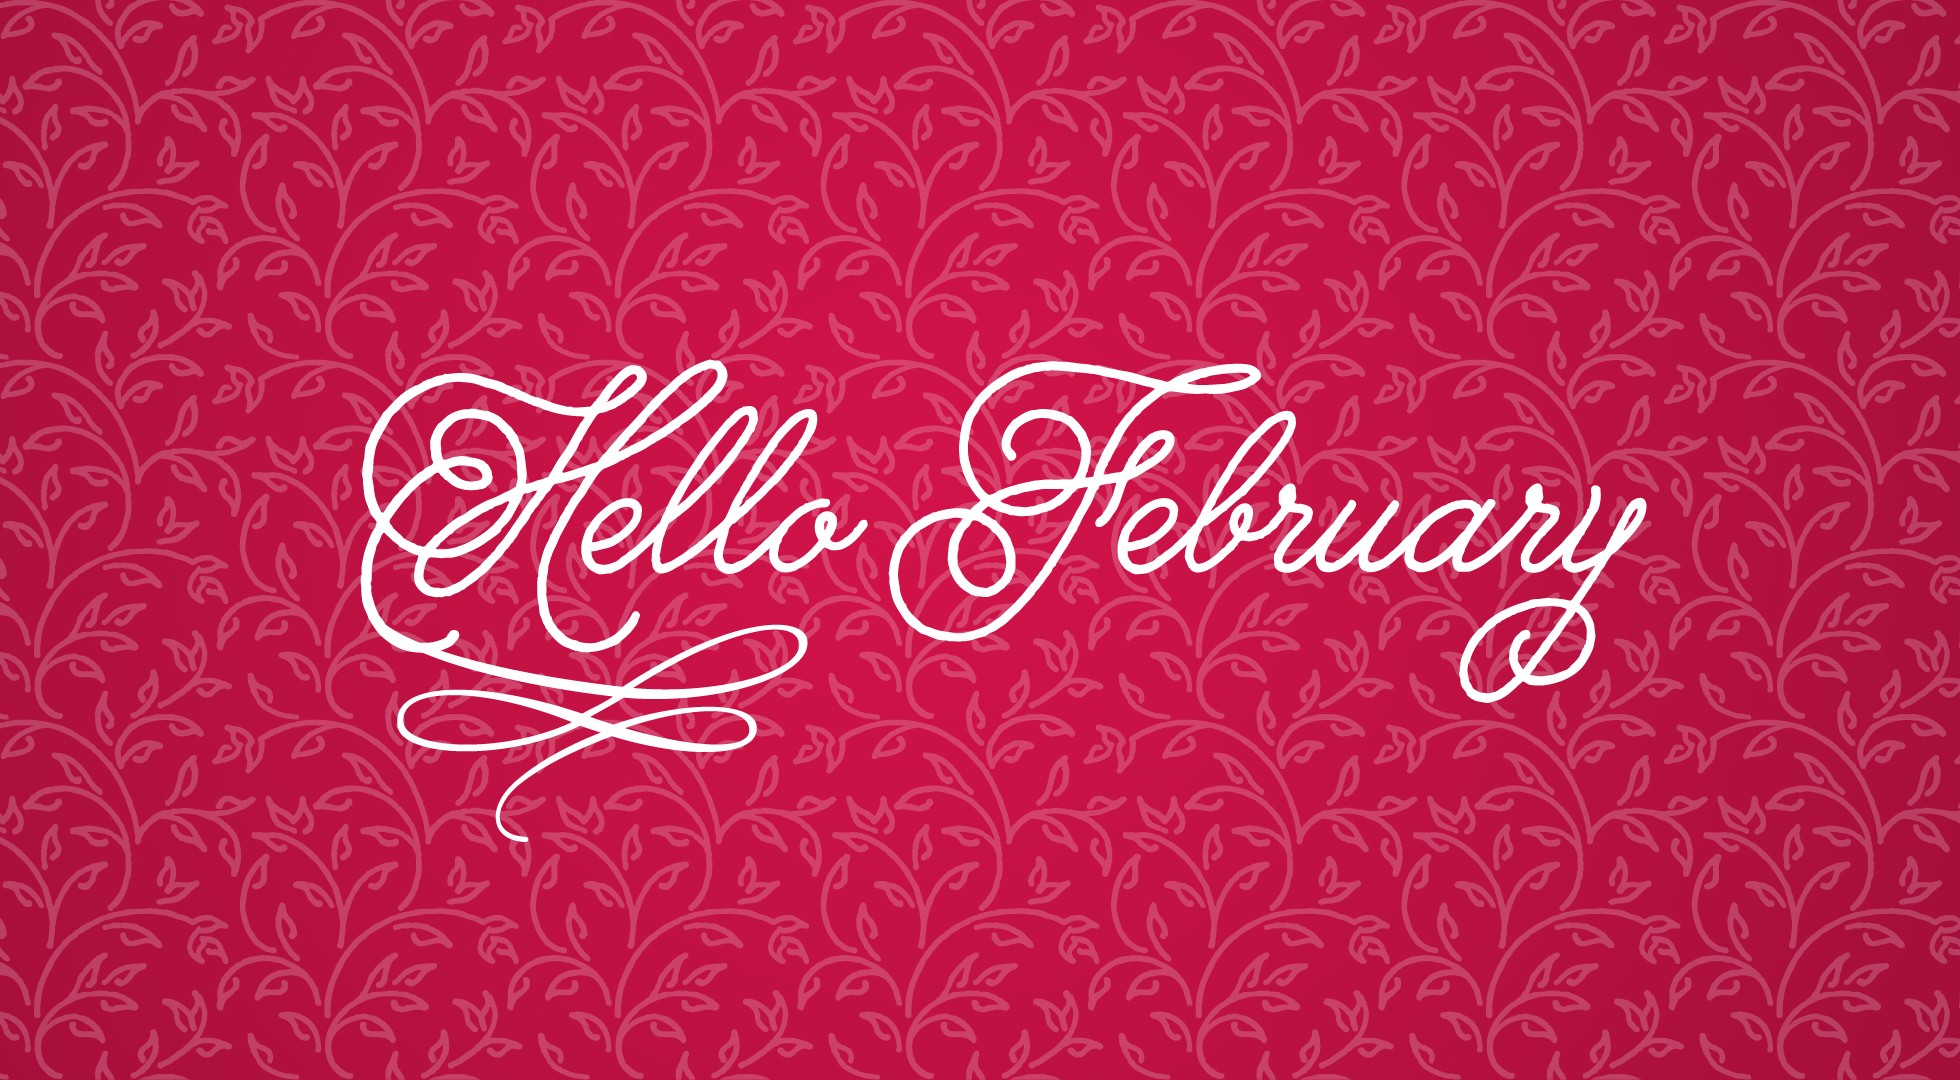 Happy New Month February greetings and images